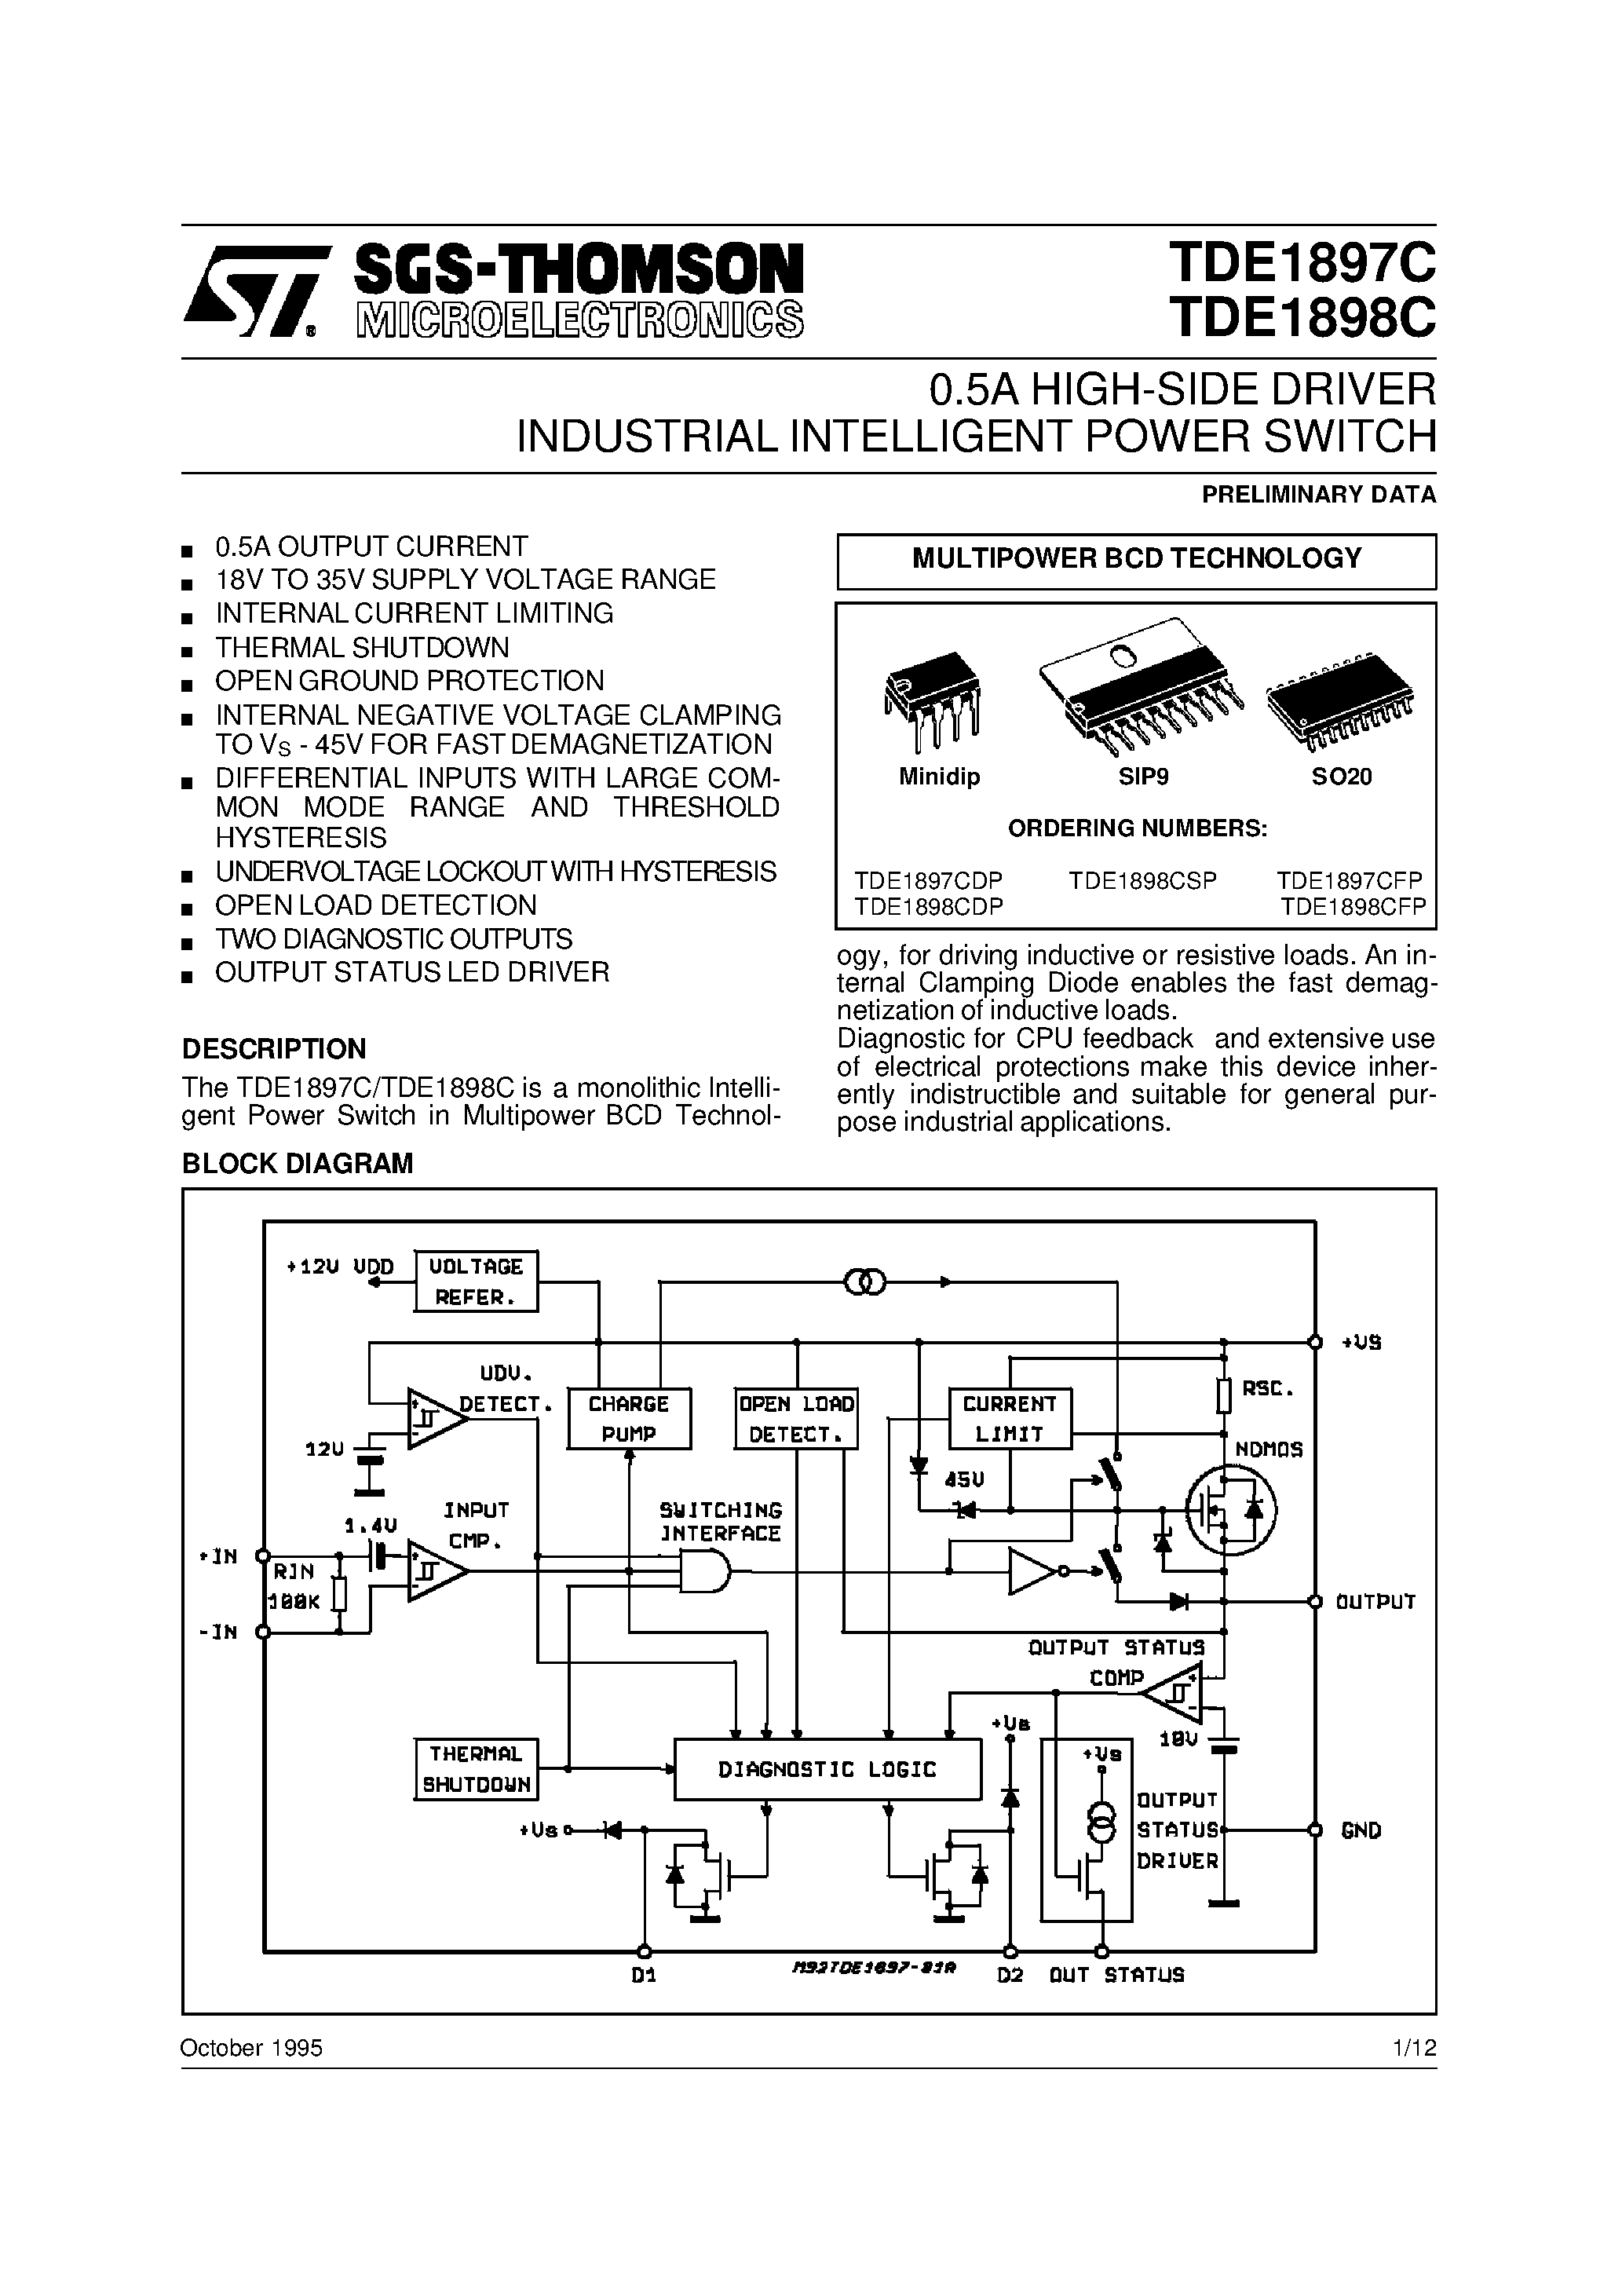 Даташит TDE1898CDP - 0.5A HIGH-SIDE DRIVER INDUSTRIAL INTELLIGENT POWER SWITCH страница 1